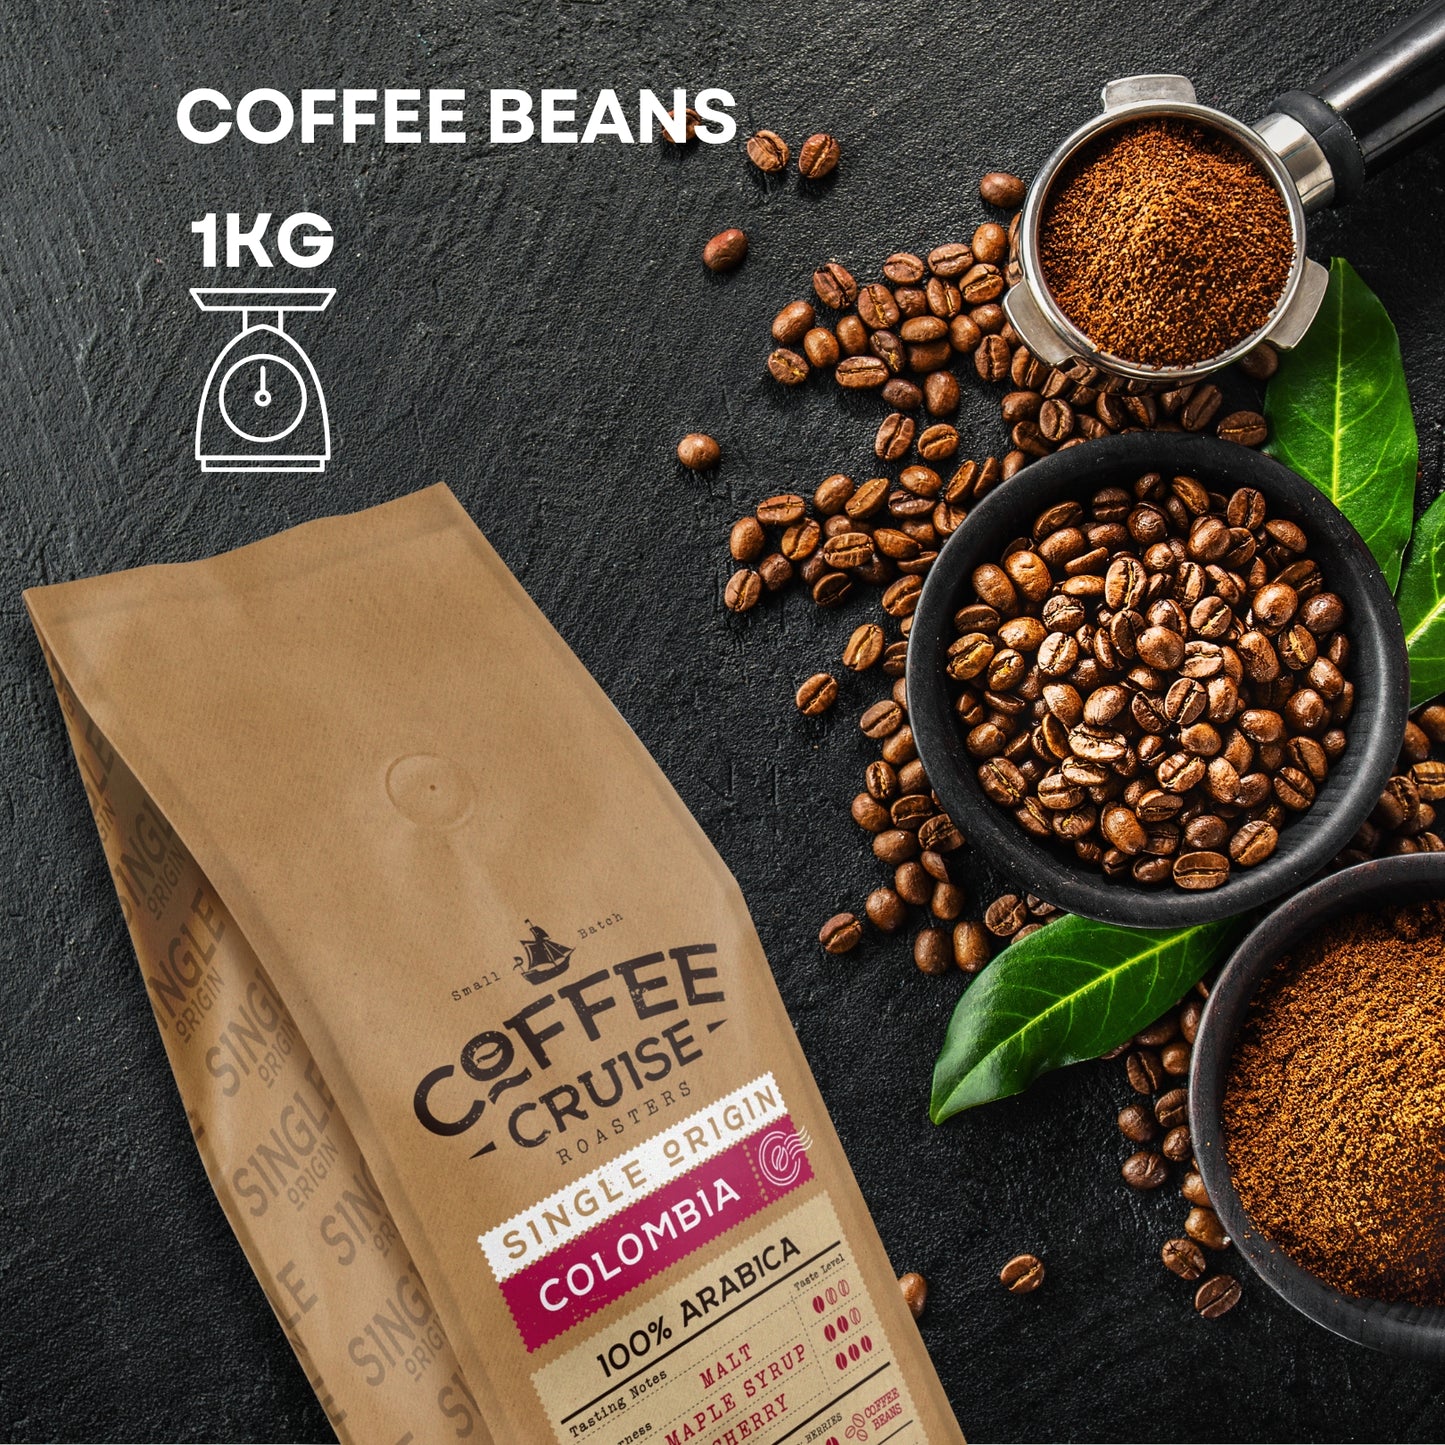 COFFEE CRUISE Colombia Coffee Beans 1kg - Medium Roasting - Aroma Berries - For All Coffee Machines - 100% Arabica